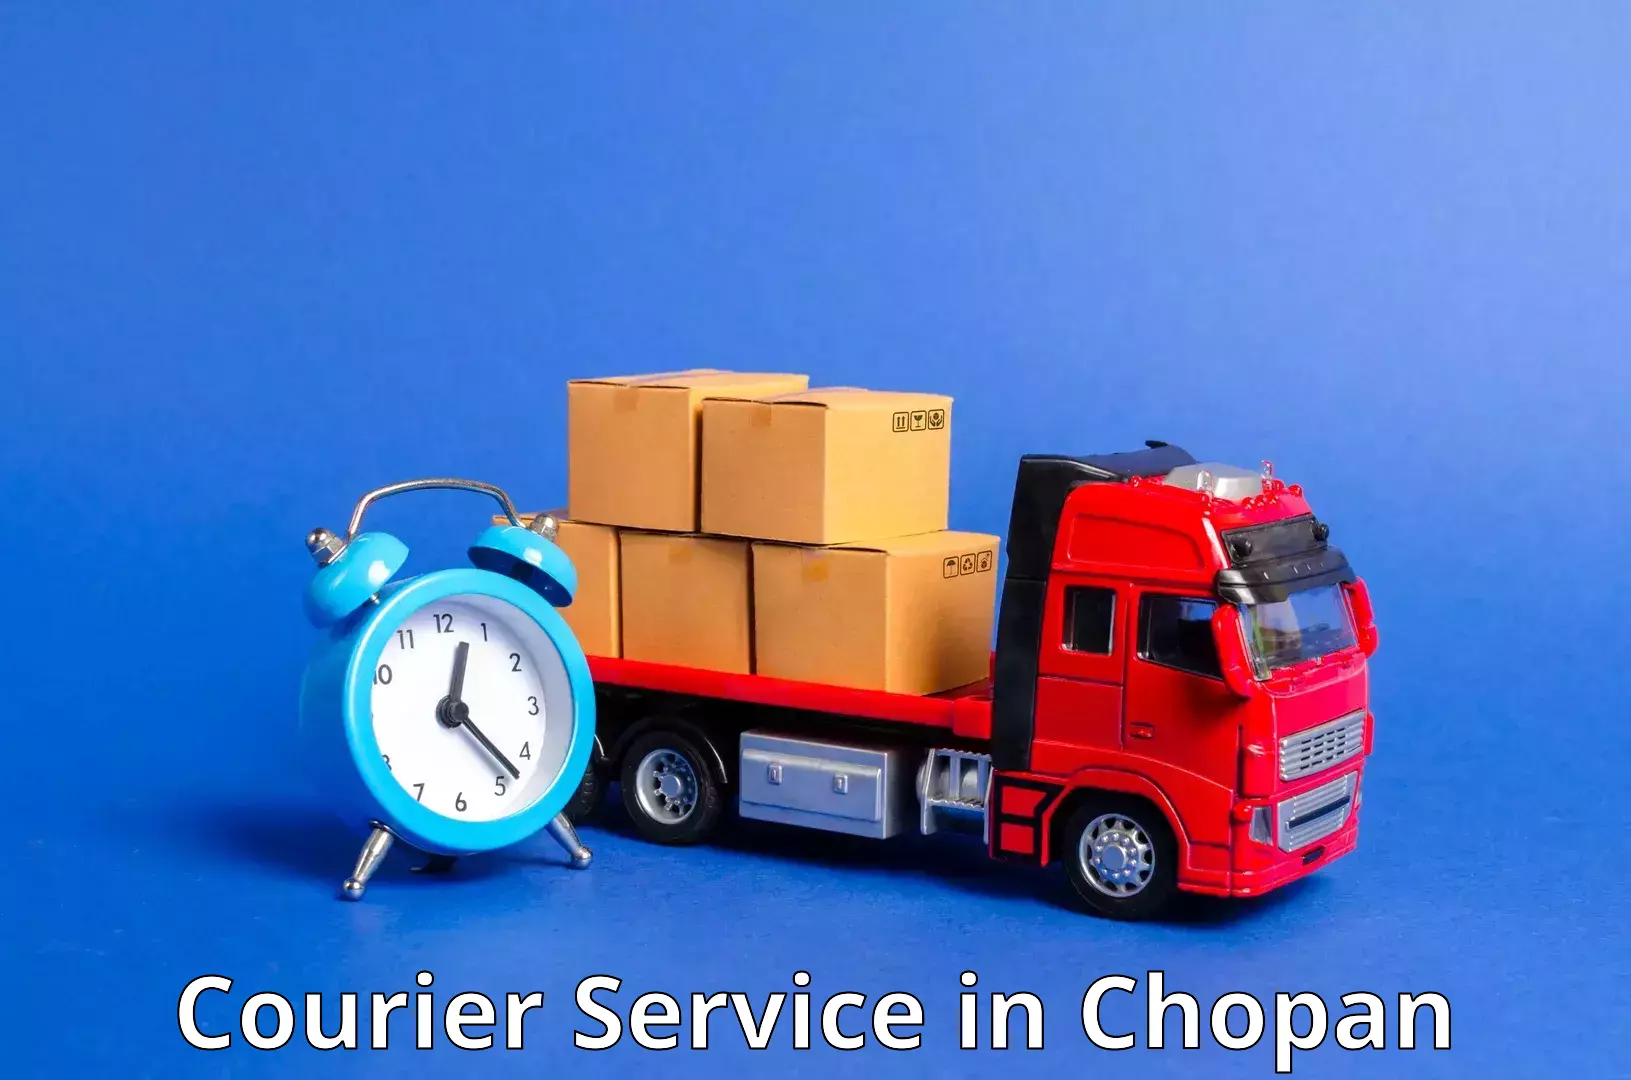 Expedited parcel delivery in Chopan